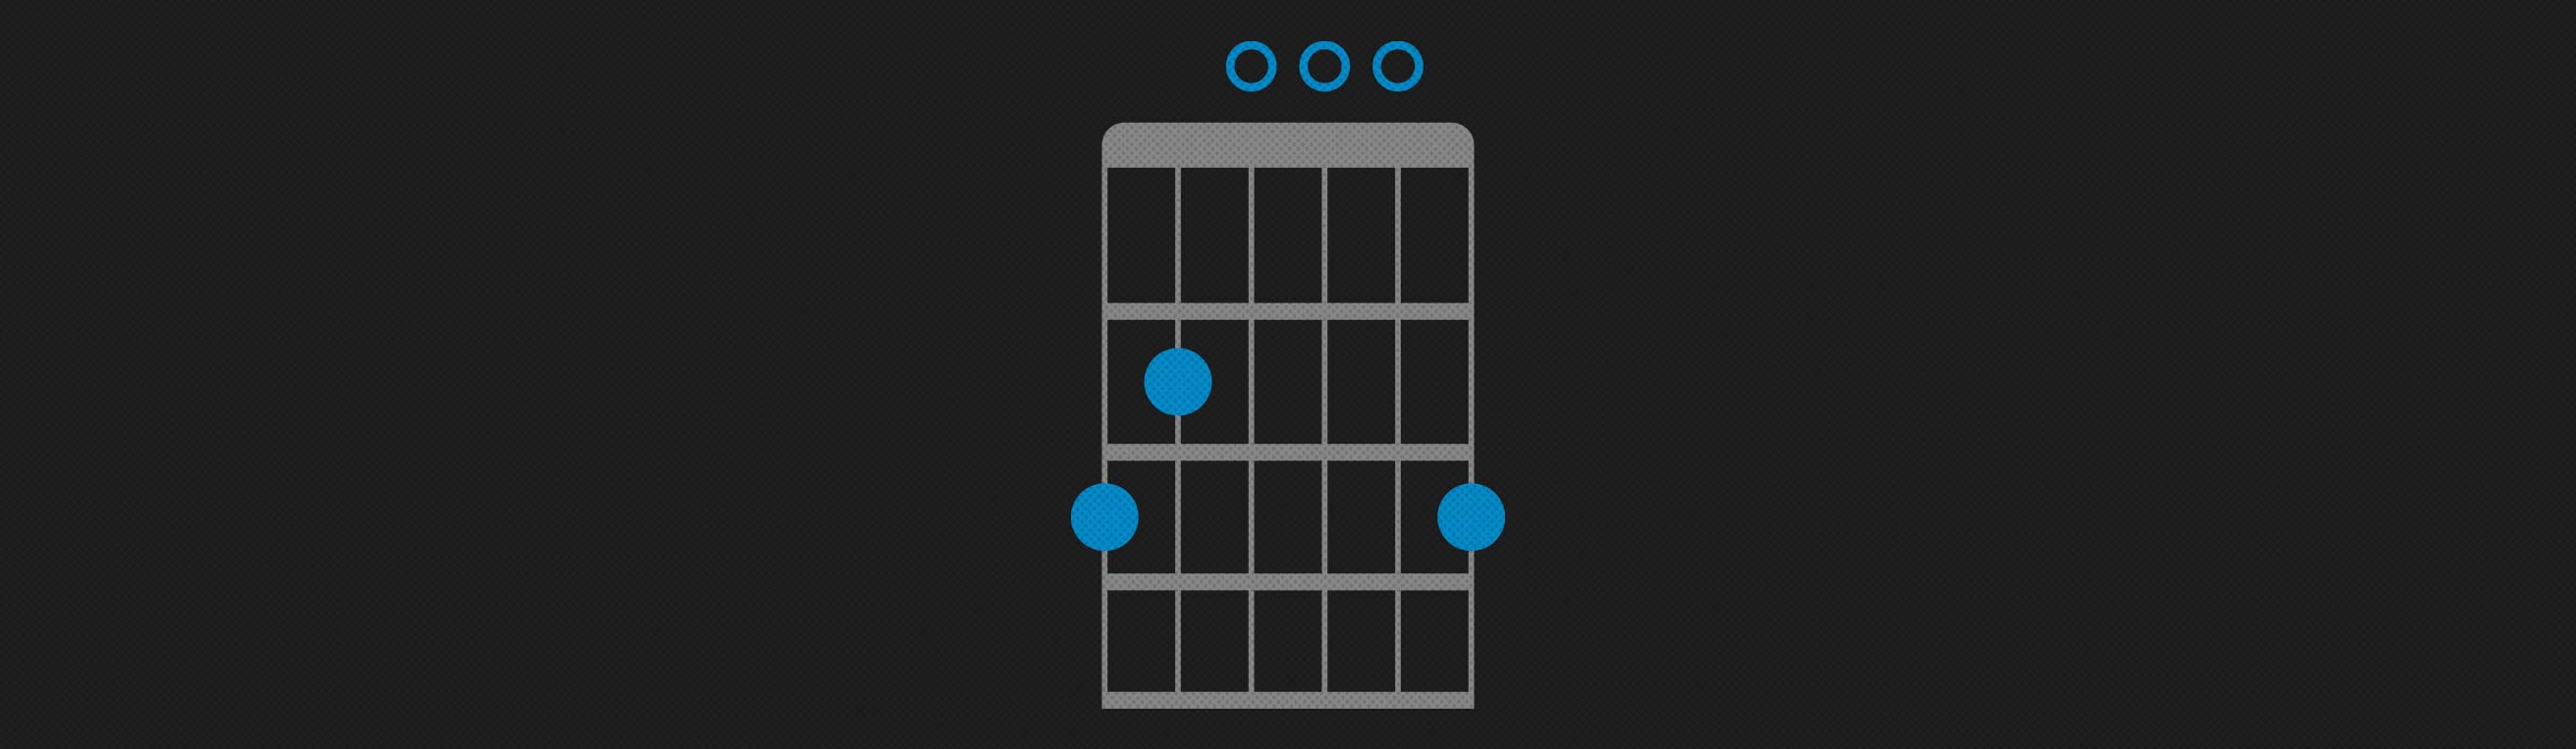 How To Play The G Chord For Guitar